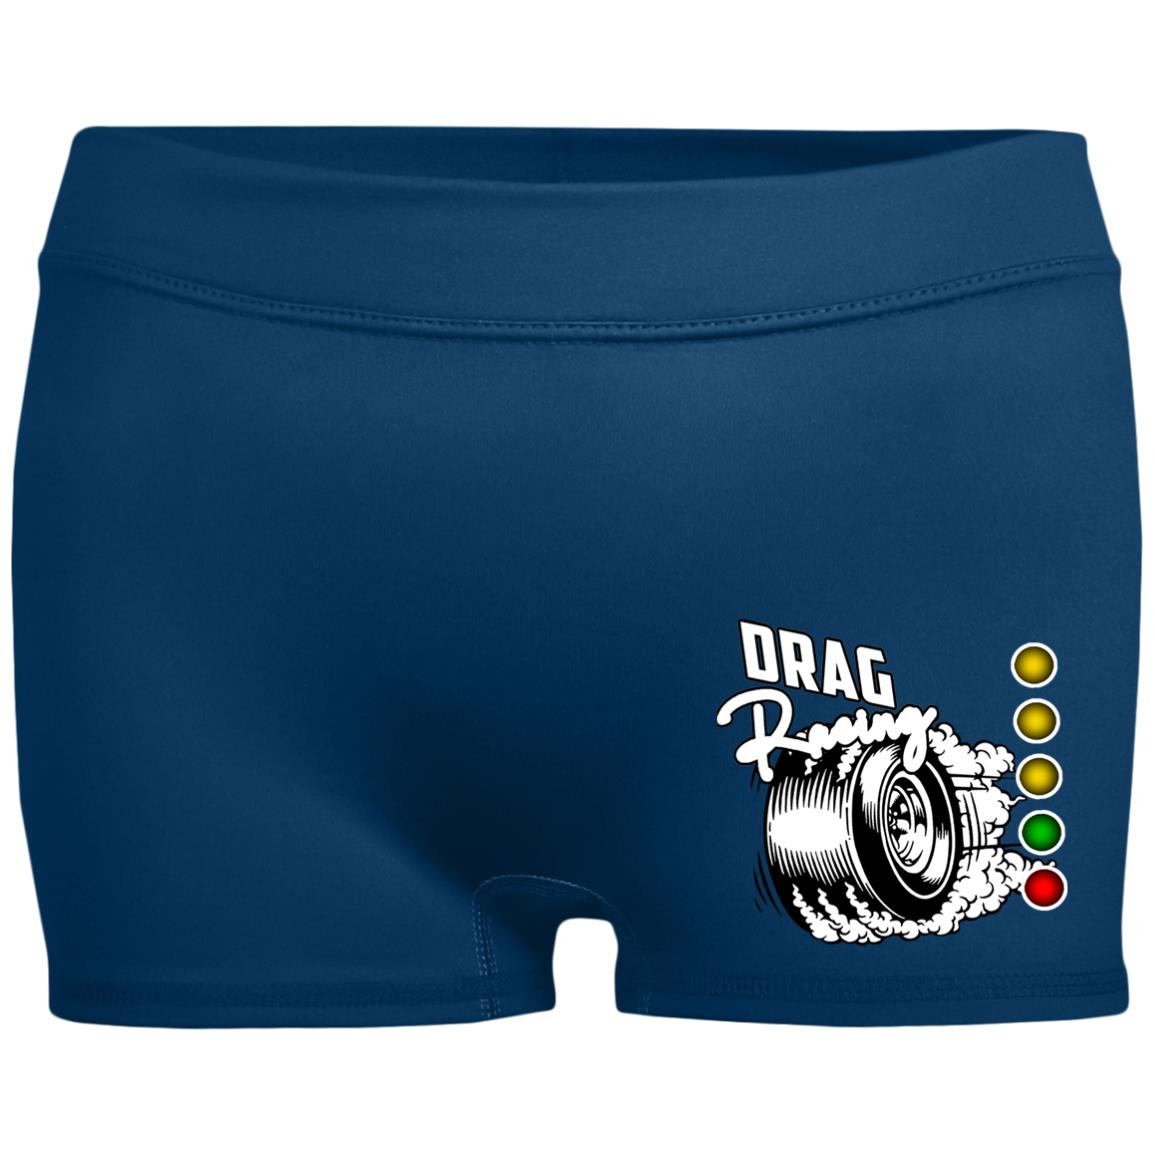 Drag Racing Ladies' Fitted Moisture-Wicking 2.5 inch Inseam Shorts